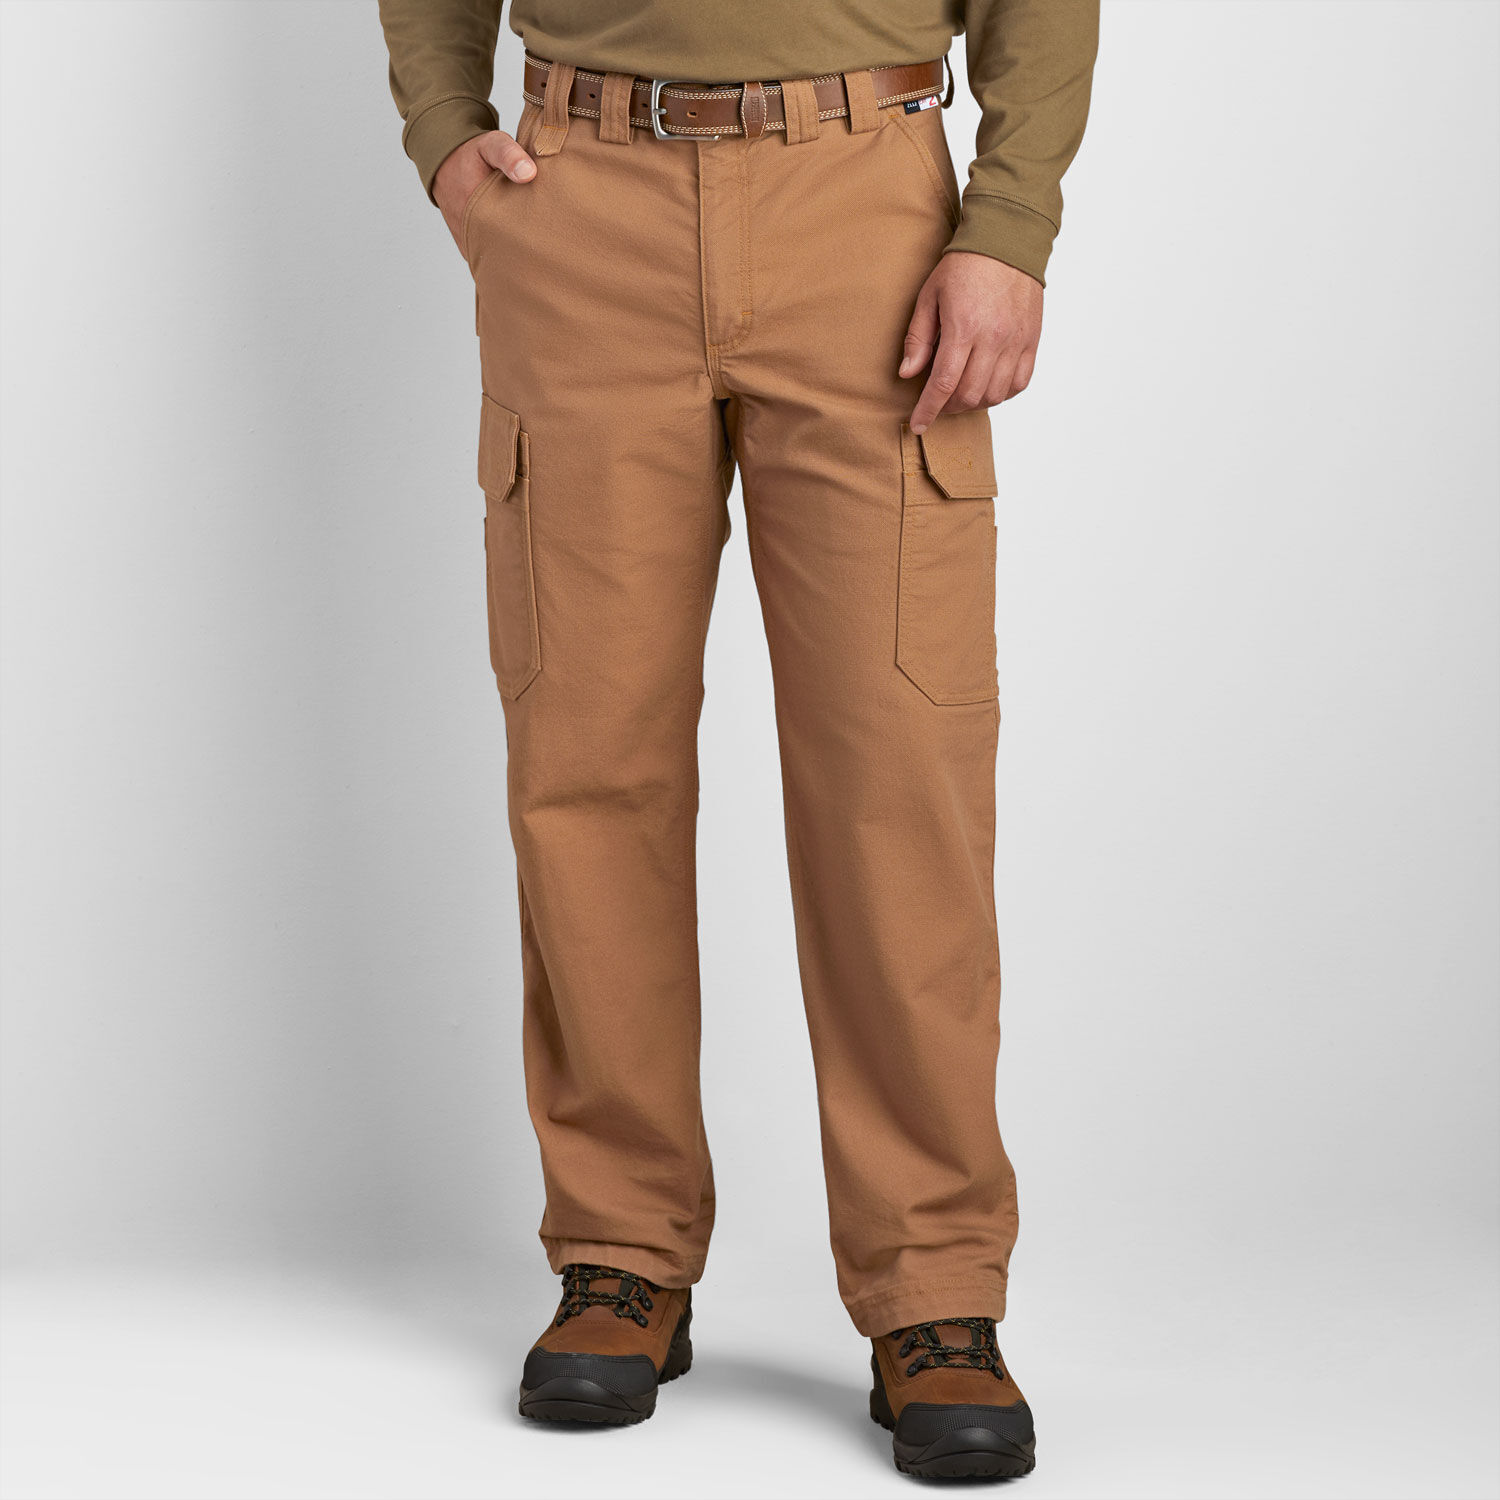 Men's Flame-Resistant Fire Hose Cargo Pants | Duluth Trading Company